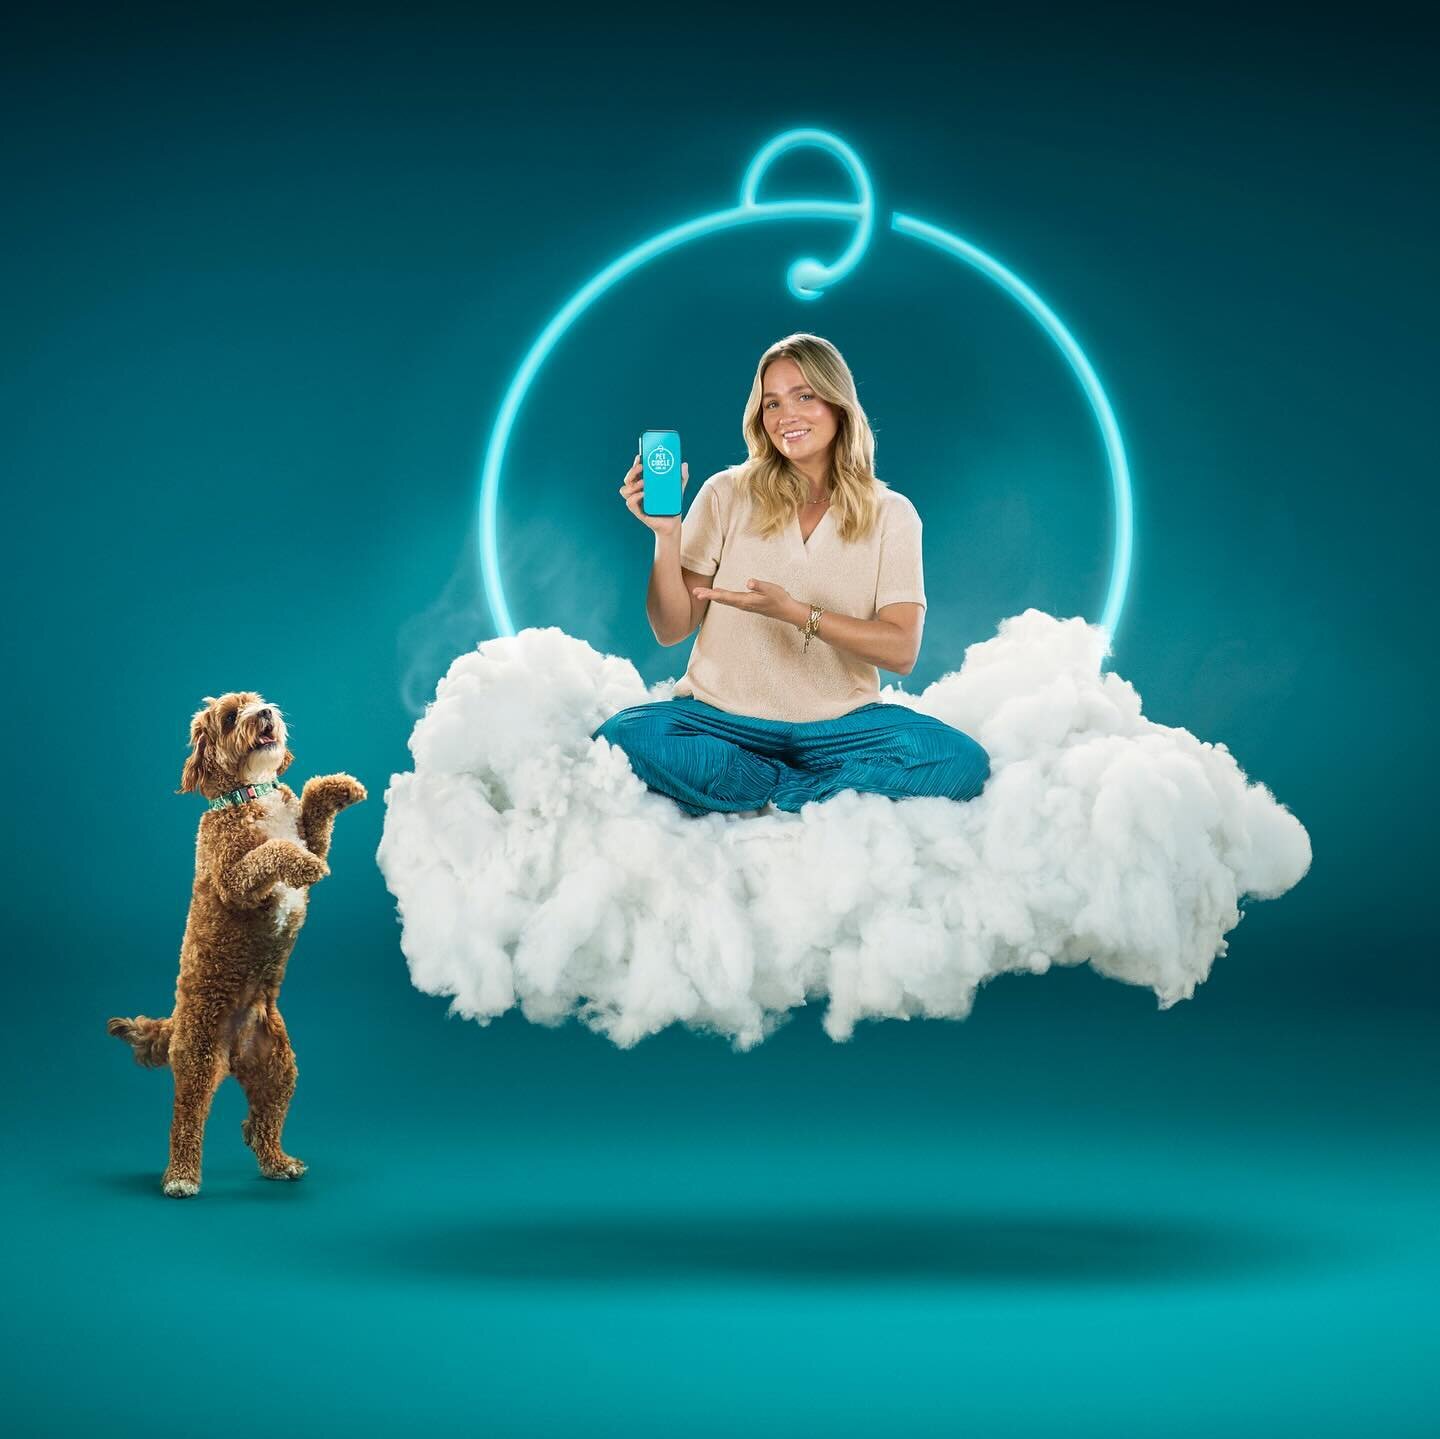 New work. A couple of favourite takes from a recent shoot with Pet Circle

#advertisingphotographer #brandshoot #sydneyphotographer #animalsphotography #aputure #sonya1 #cloud #glow